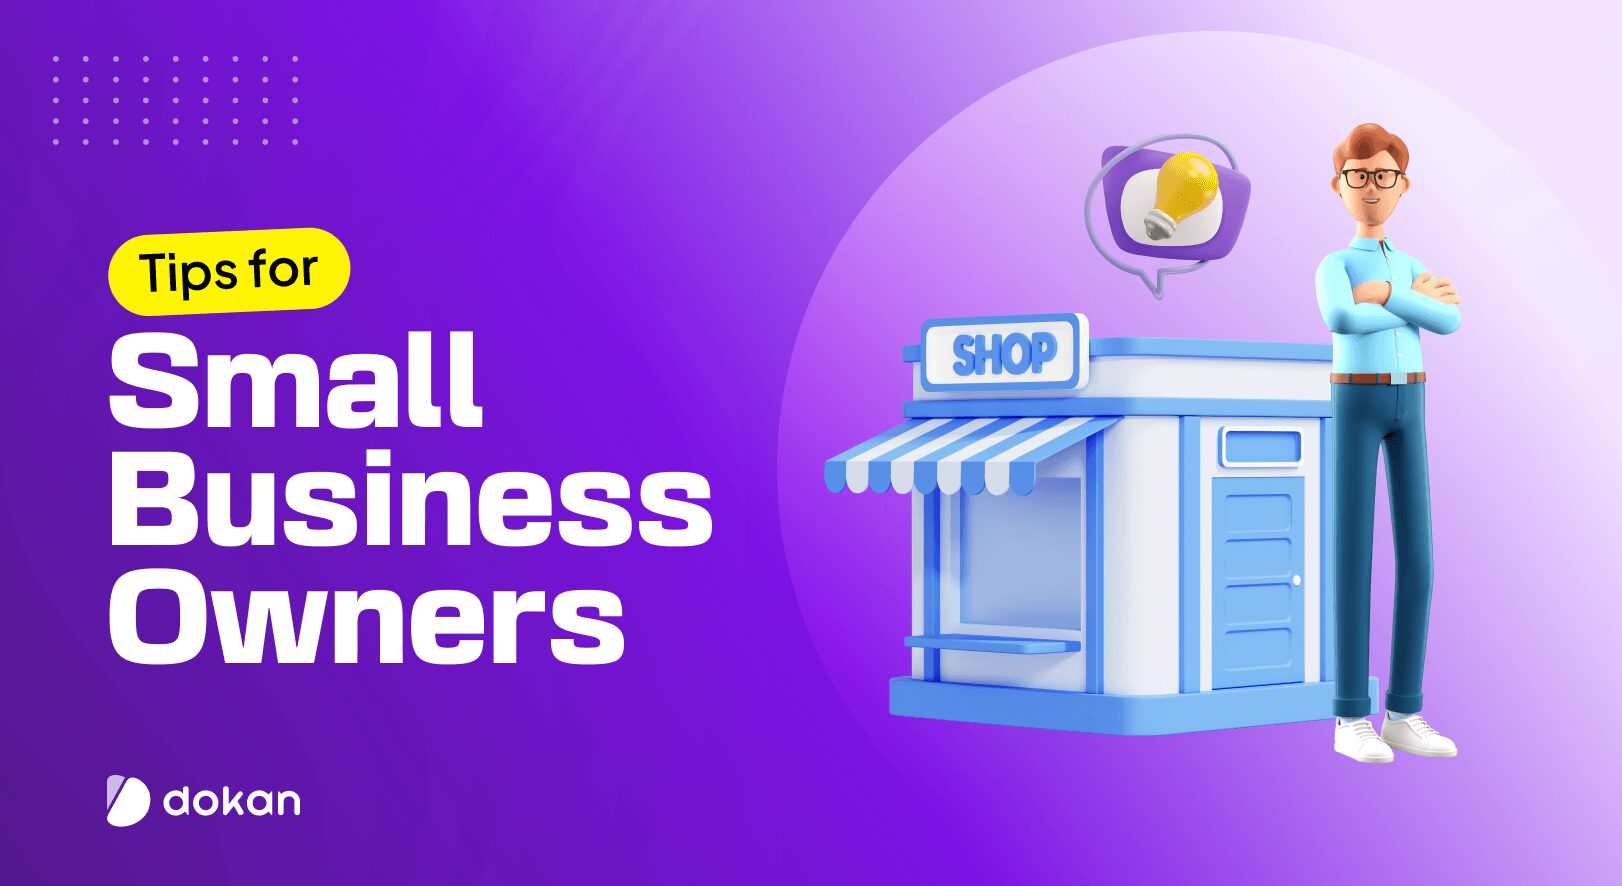 The feature image of tips for small business owners